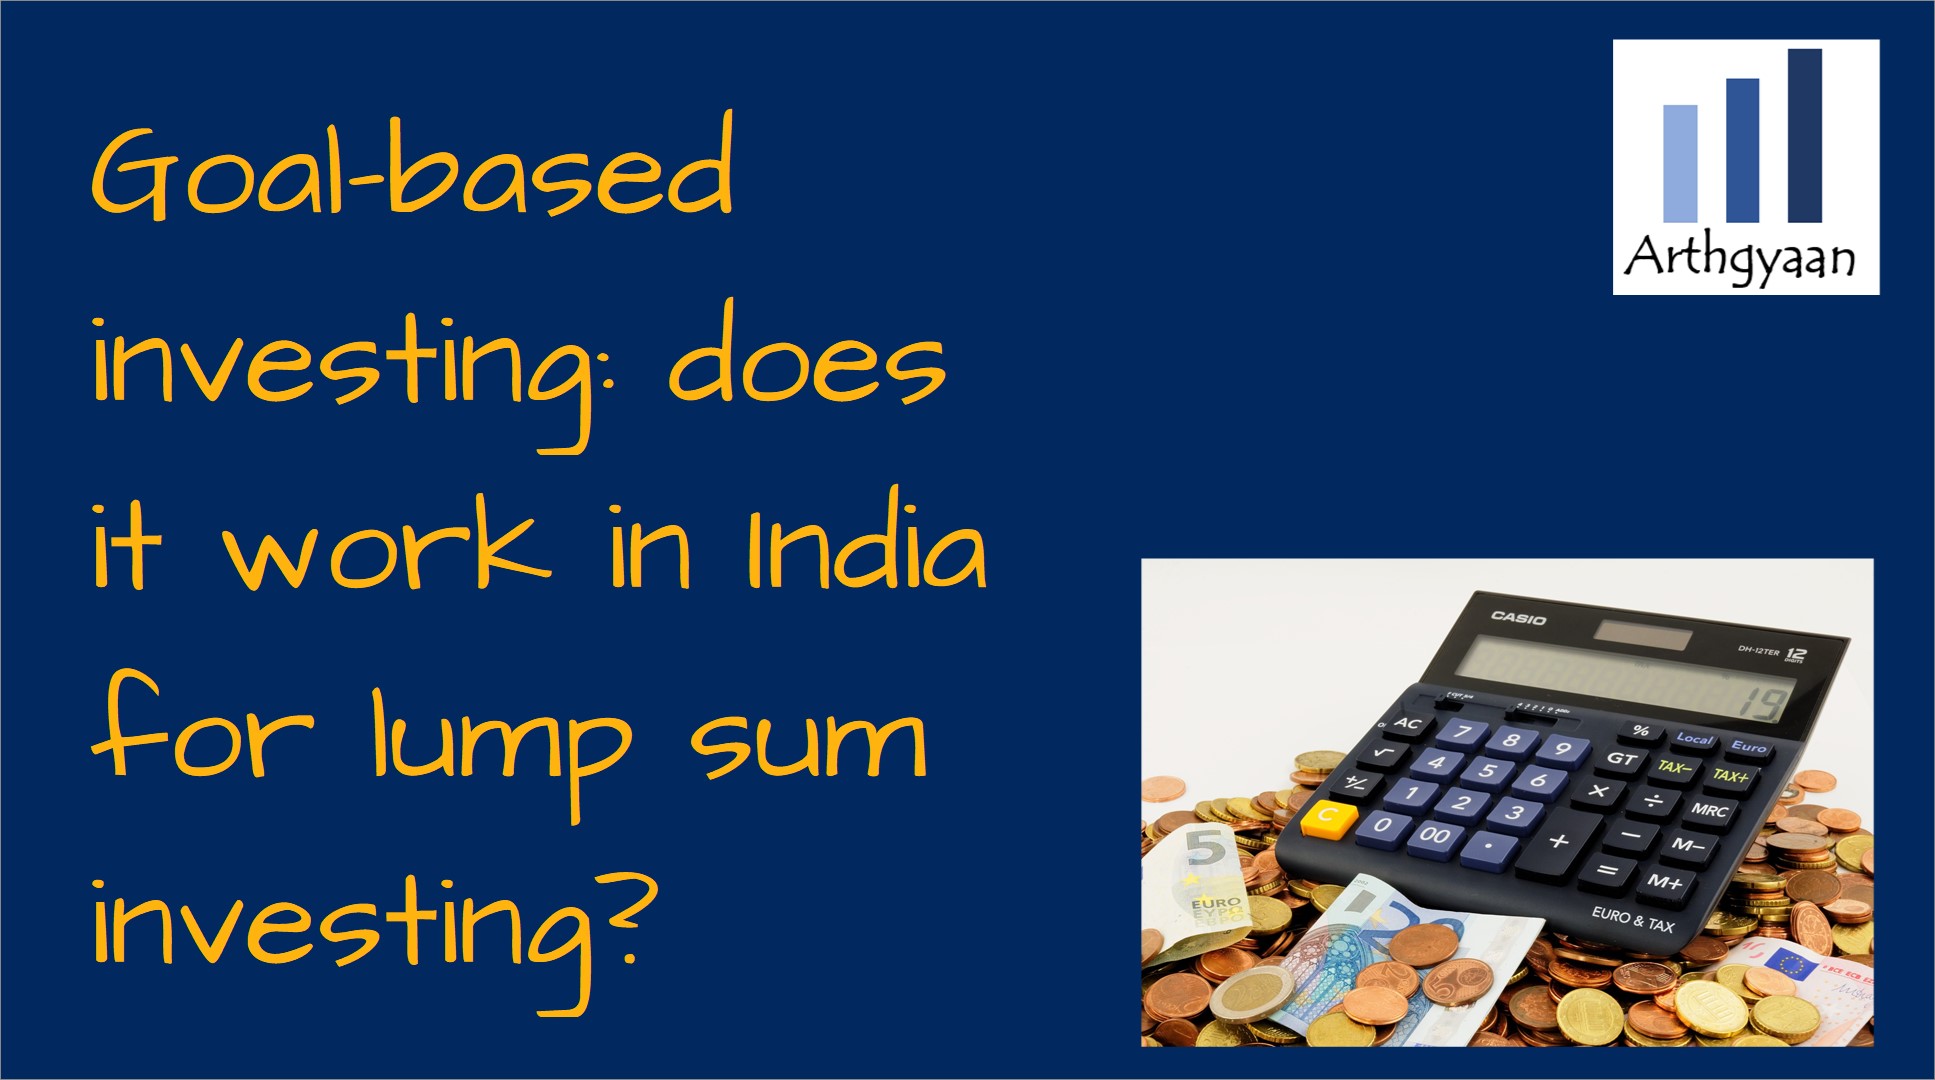 Goal-based investing: does it work in India for lump sum investing?